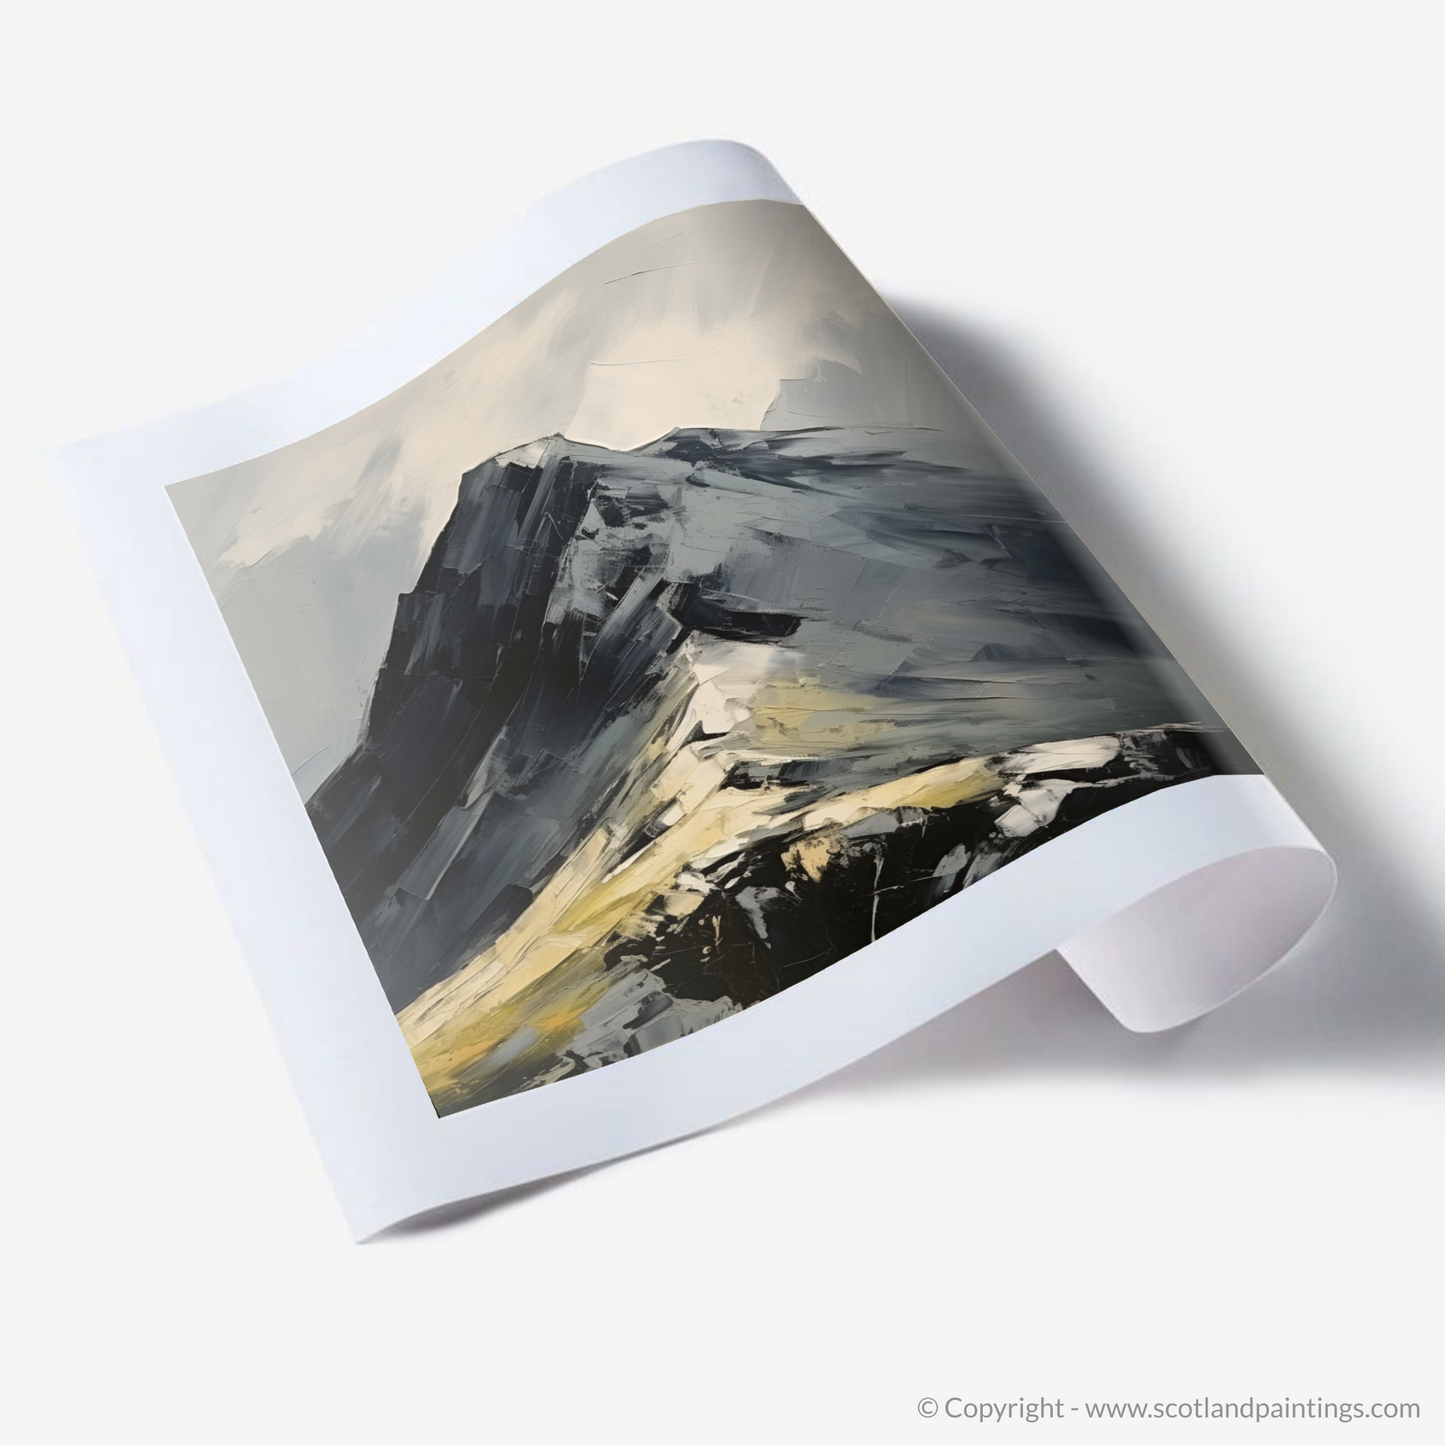 Painting and Art Print of Beinn Ìme. Beinn Ìme: An Expressionist Ode to the Scottish Highlands.